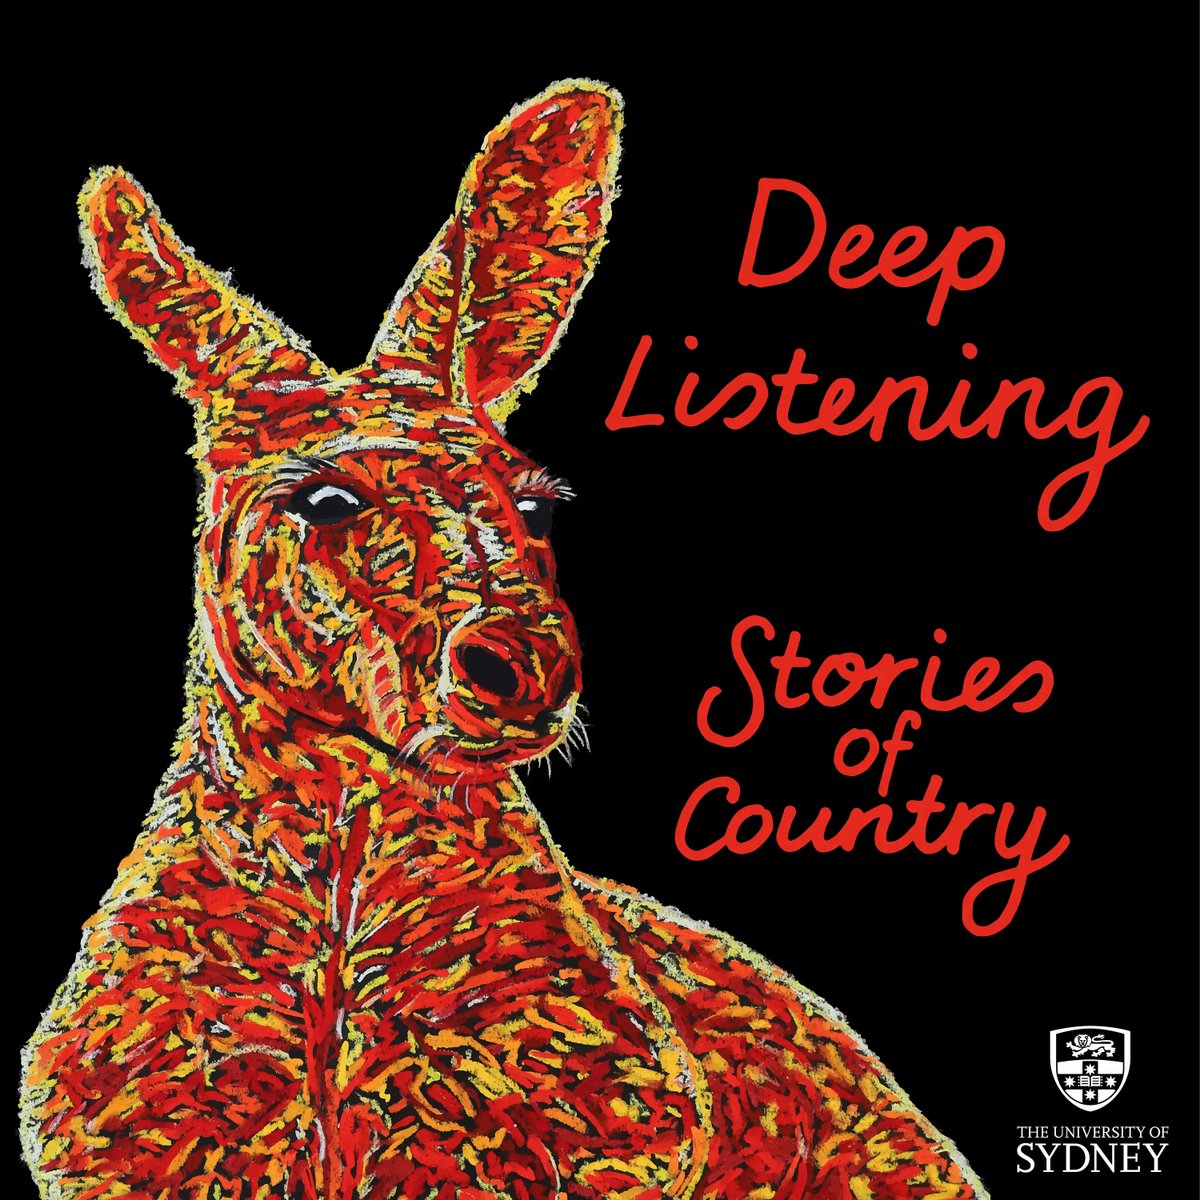 Tune in to 'Deep Listening: Stories of Country' on your favorite podcast app which is a series we produced for Sydney University:
buff.ly/3CdG3yq 

#DeepListeningPodcast #StoriesofCountry #SydneyUniversity #NewPodcastSeries #FirstNationsStories